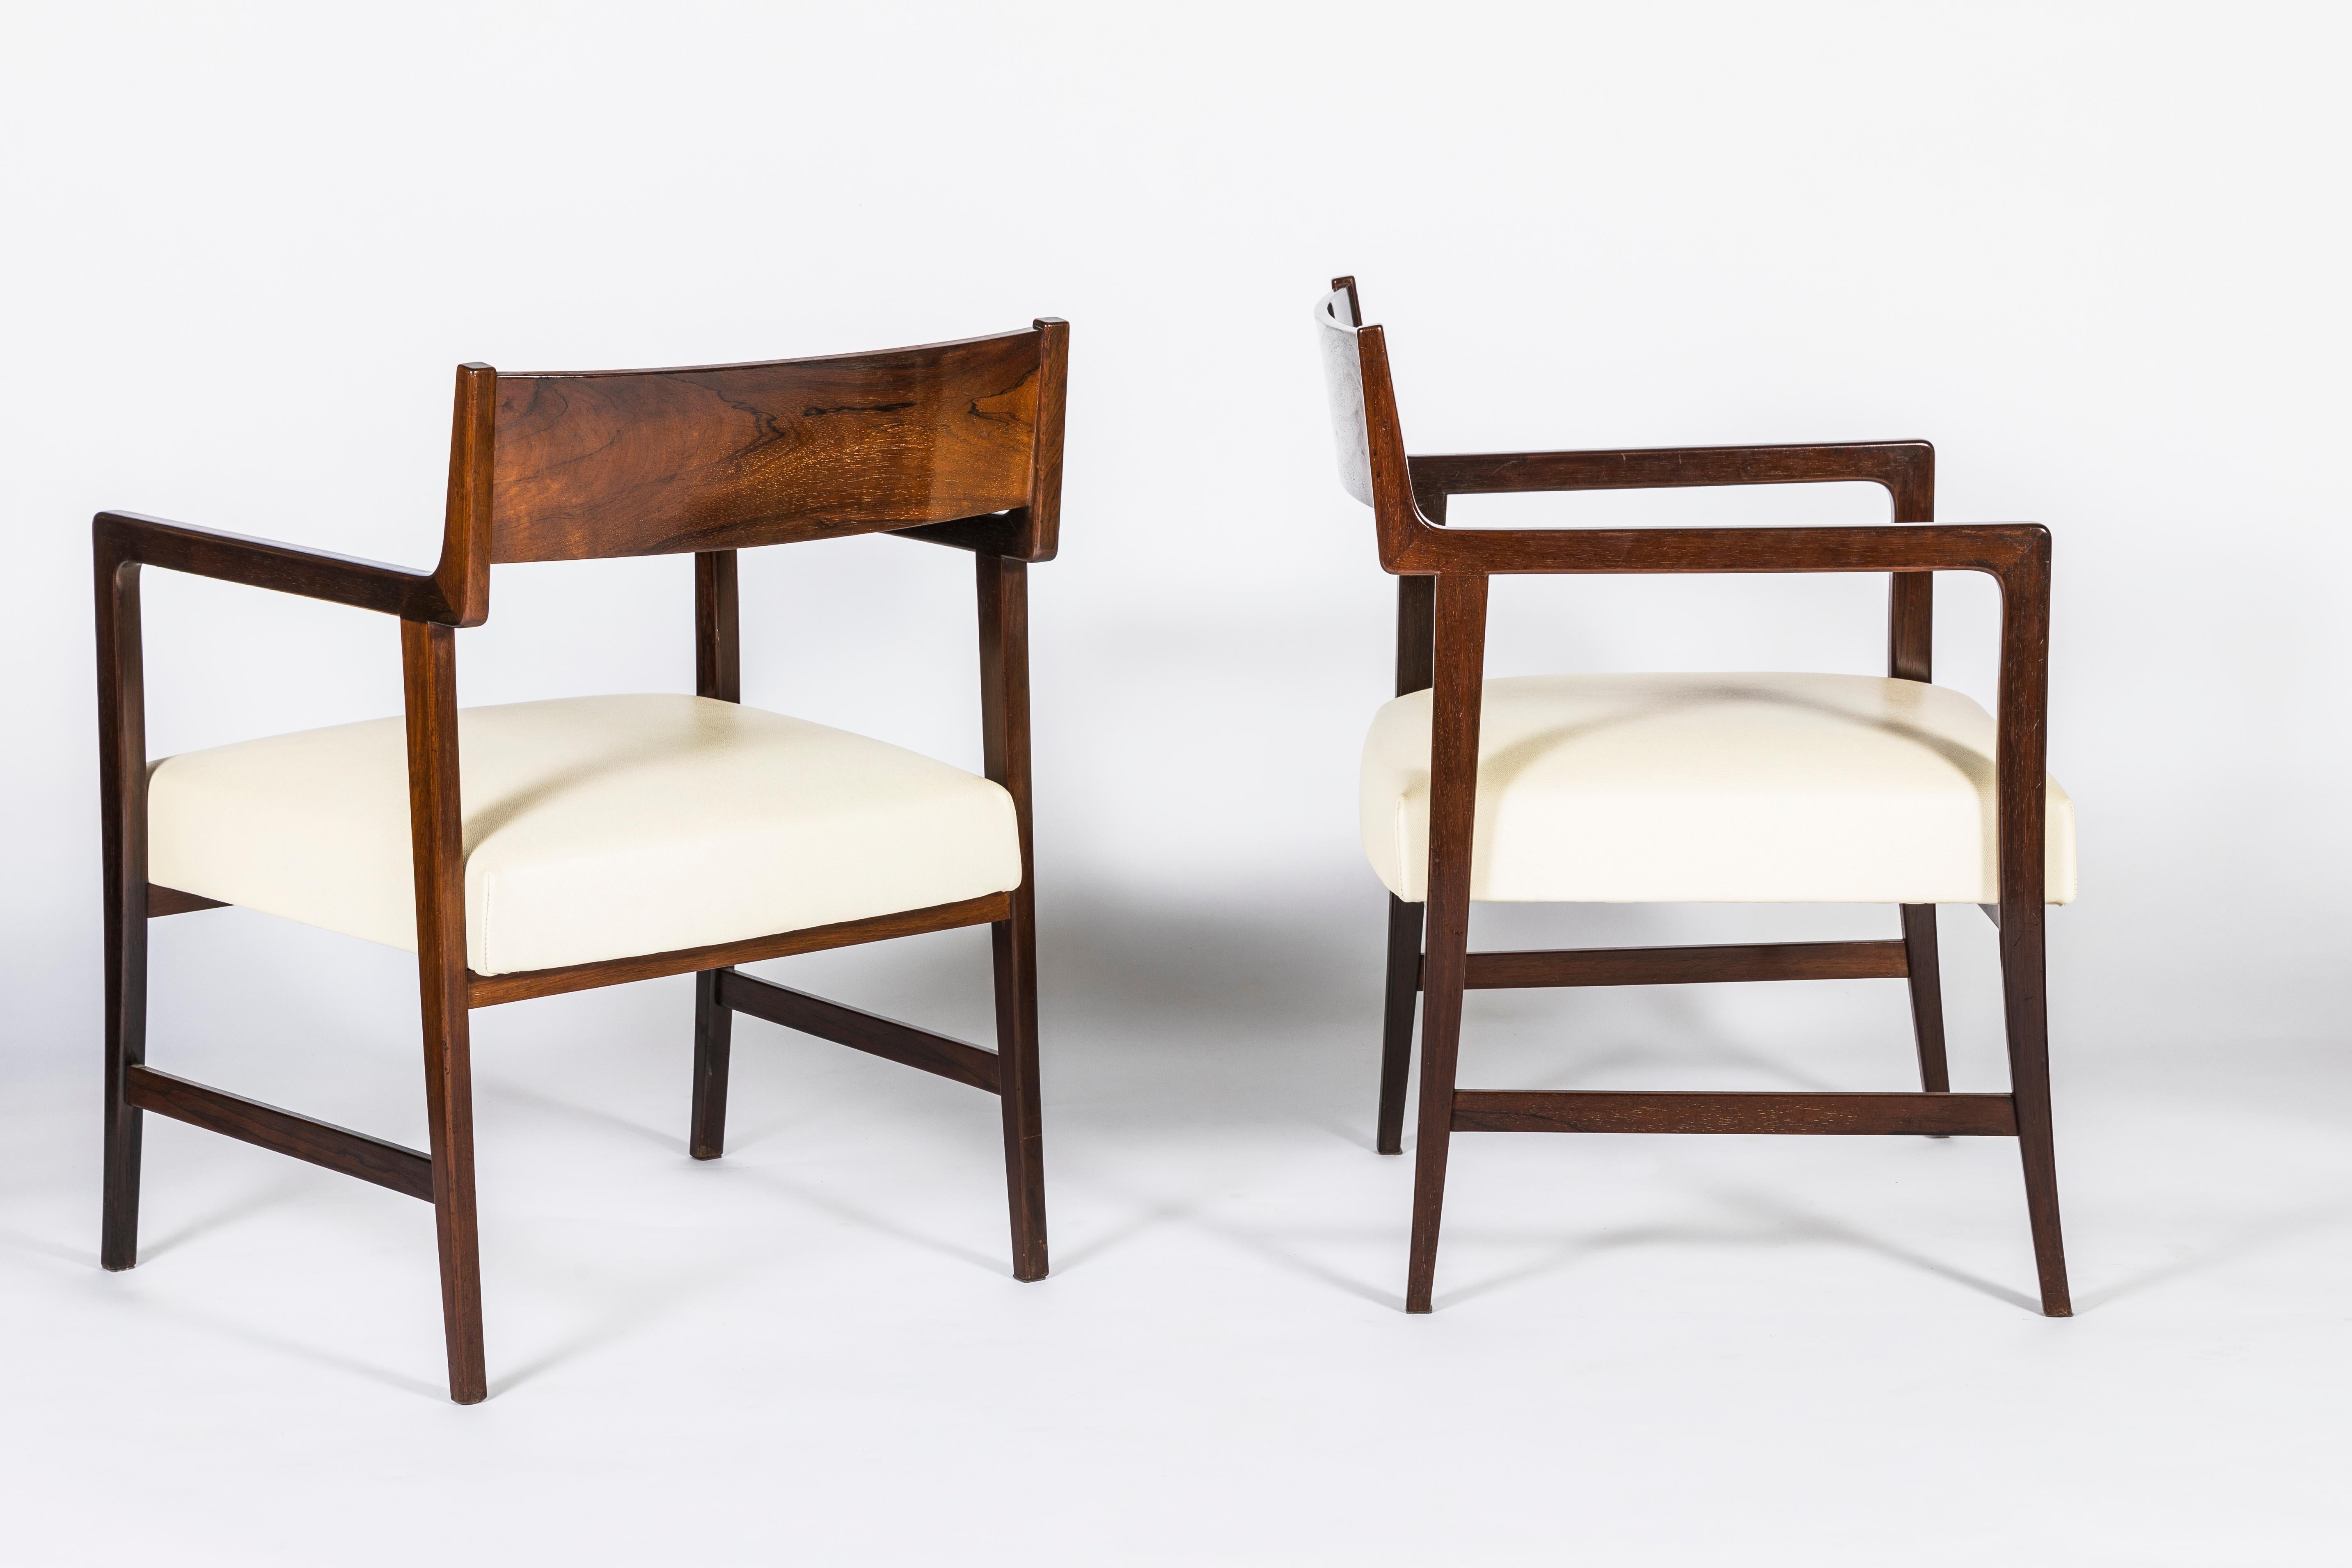 Pair of armchairs made of solid walnut from Joaquin Tenreiro, 1960
Sculpted wood with a great quality of wood: density and deep grain. 
Subtil and geometric curves inspired by the Danish Mid Century design with the large Brazilian dimensions. 
The